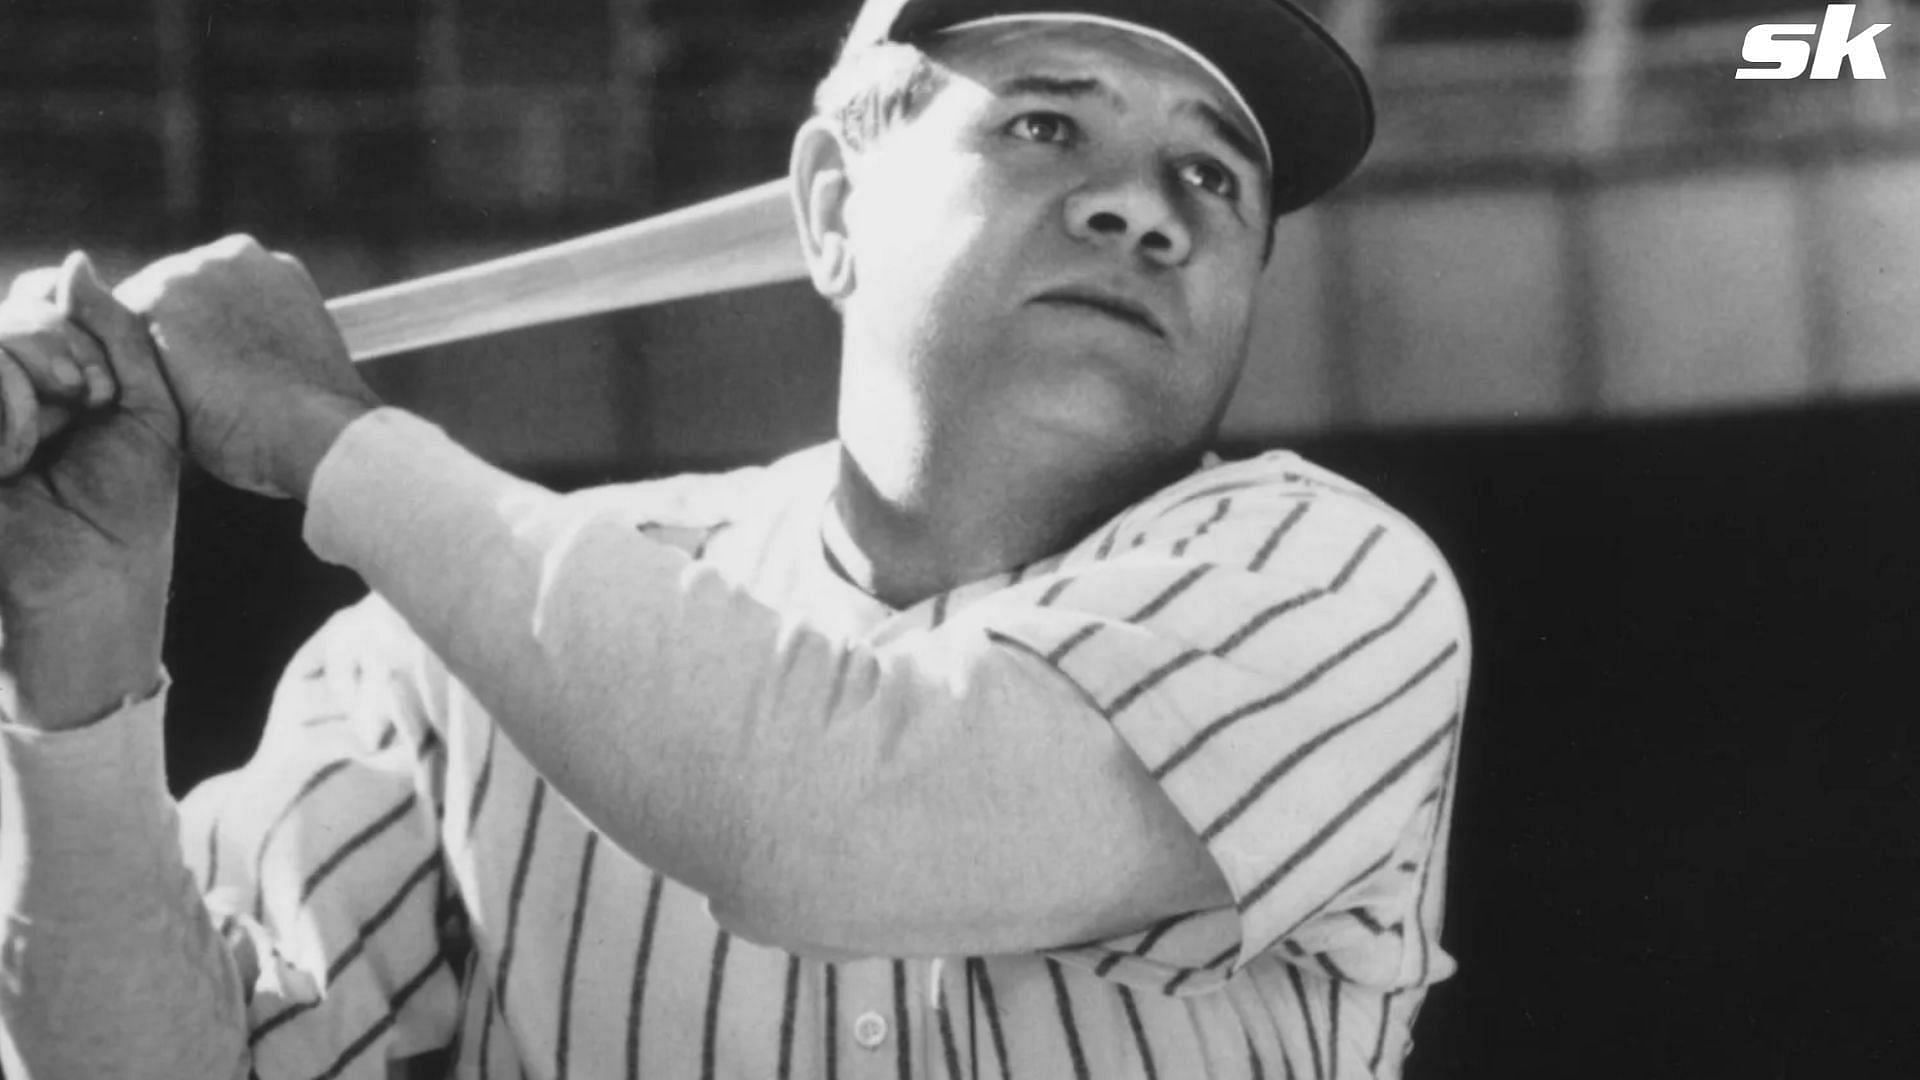 100+] Babe Ruth Pictures